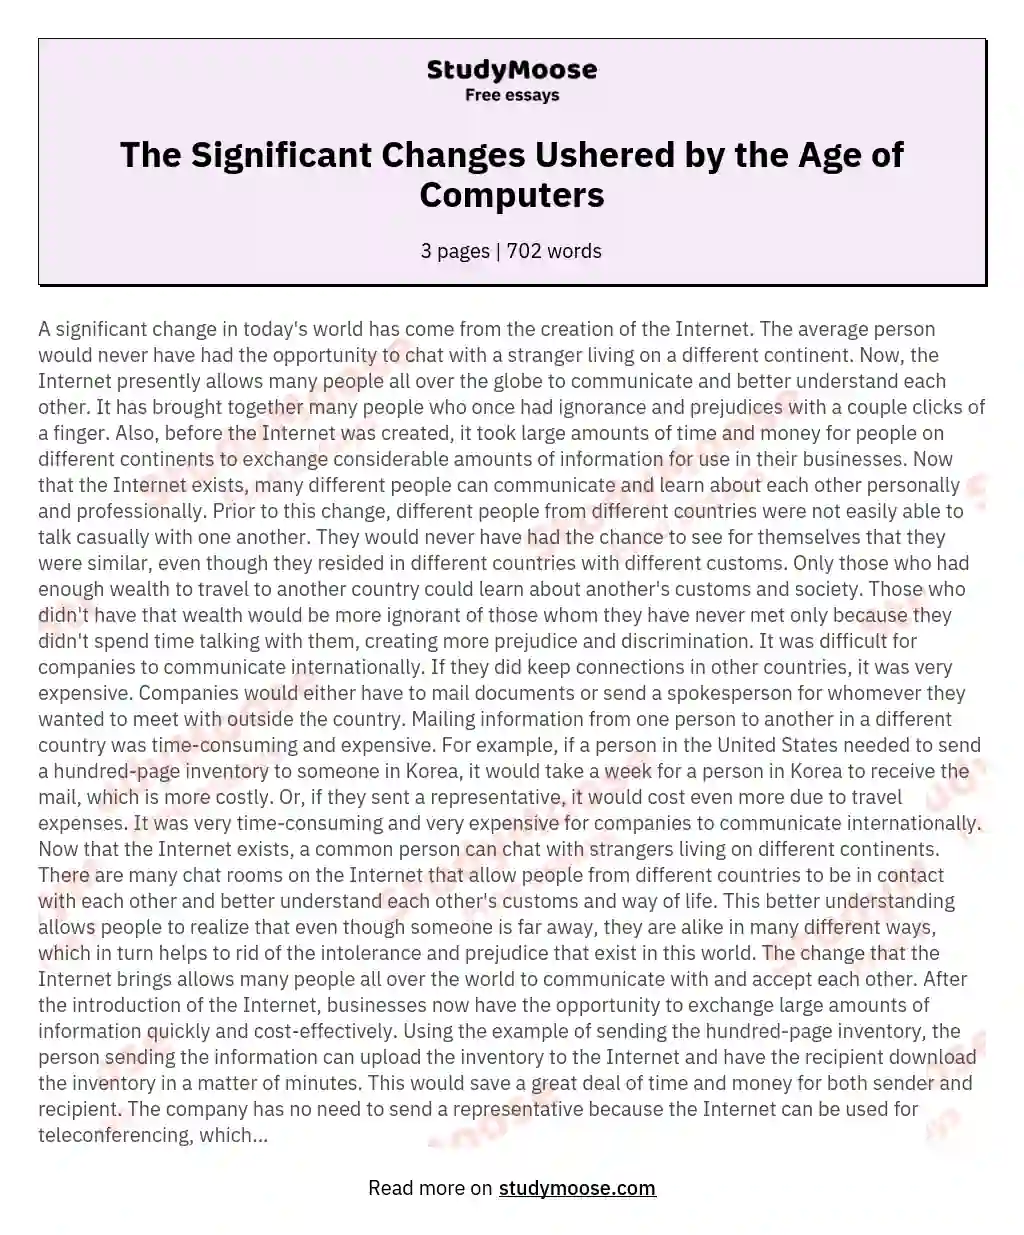 The Significant Changes Ushered by the Age of Computers essay